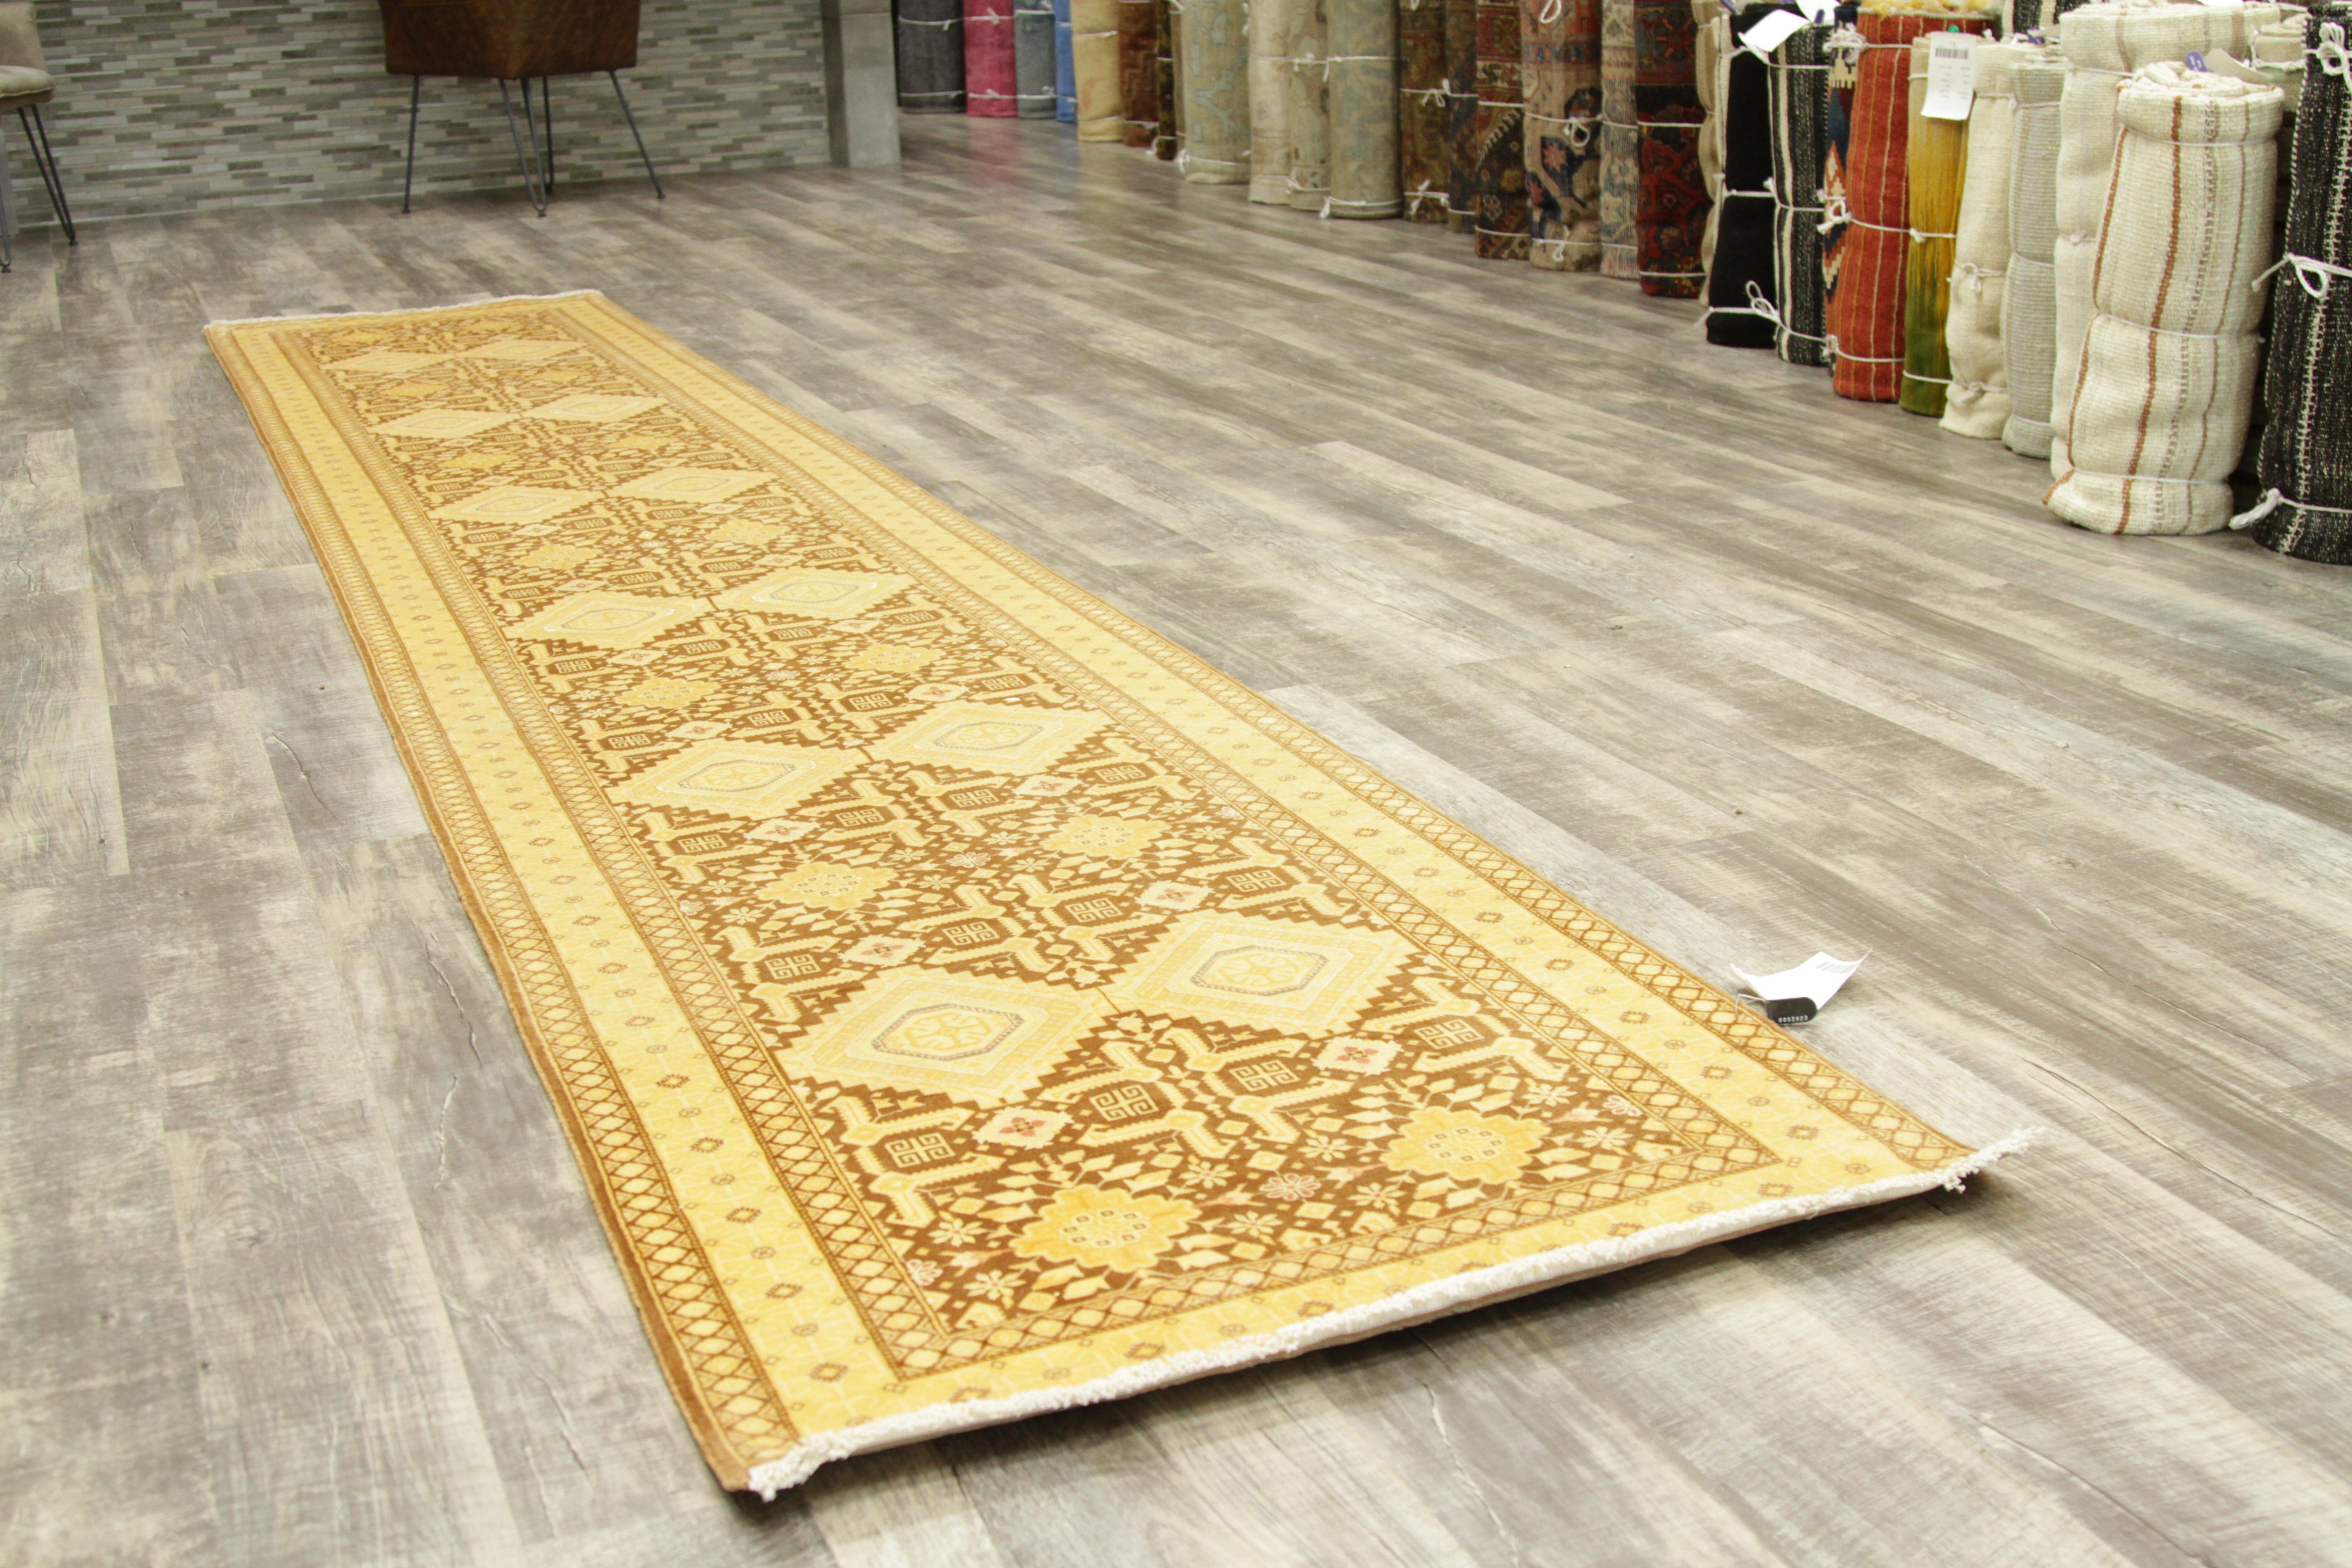 Antique Persian Rug in Tabriz Design with Gold & Brown Color Palette, circa 1940 For Sale 8